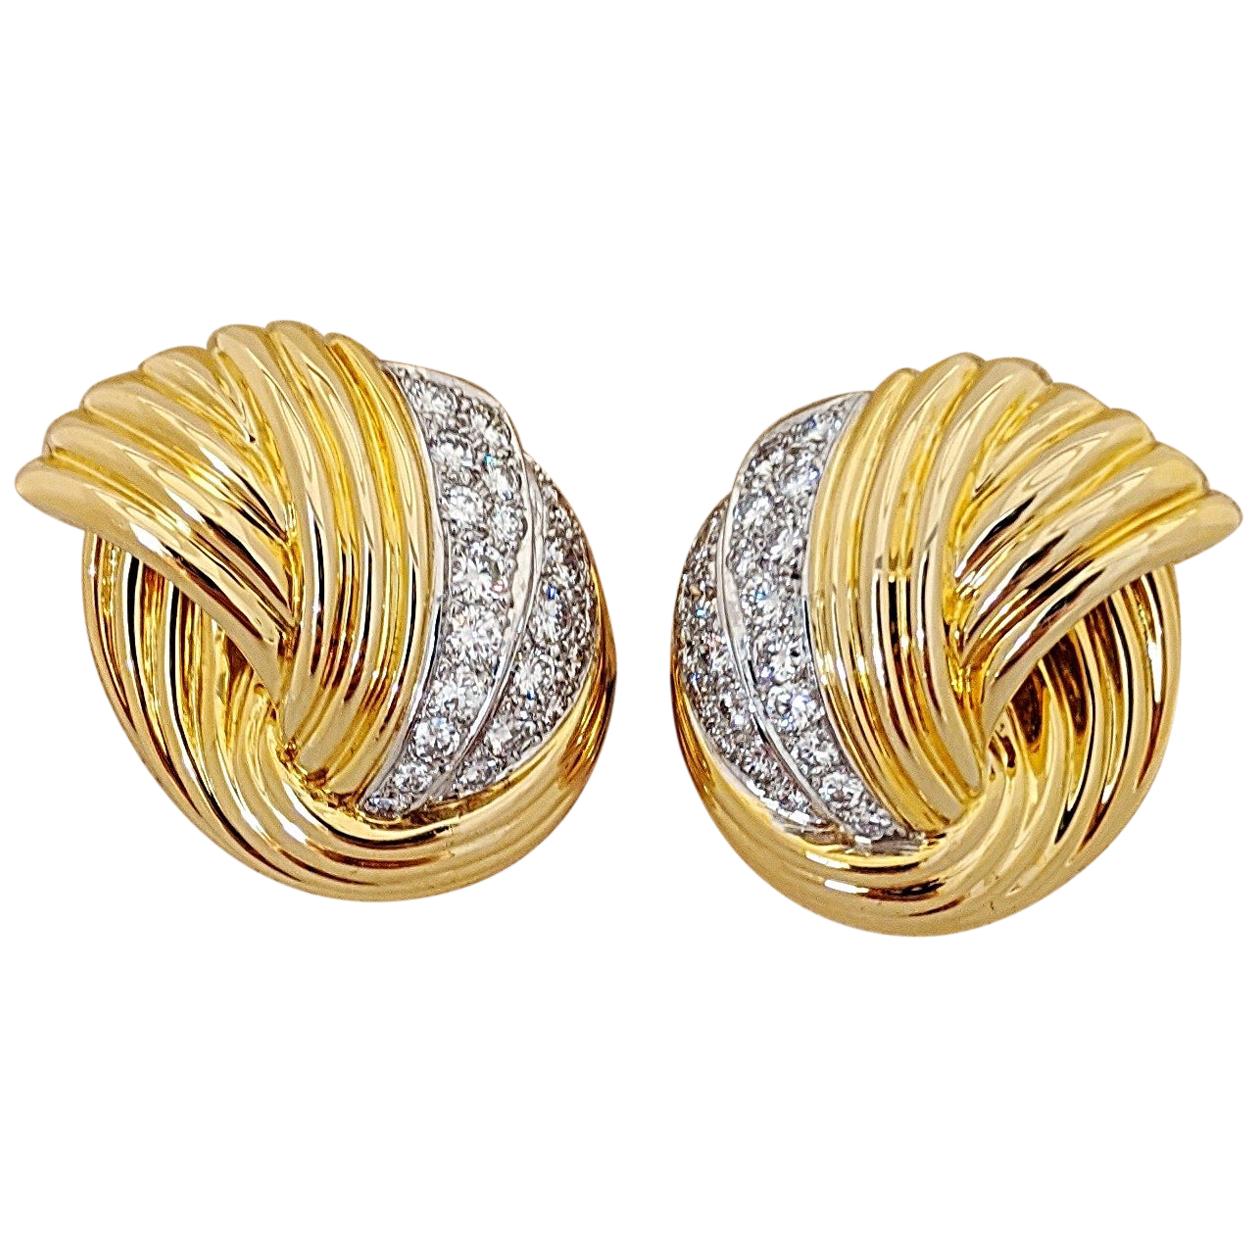 Cellini Jewelers 18 KT Y/W Gold, 2.24 CT Vintage Collectible Dia.Swirl Earrings For Sale